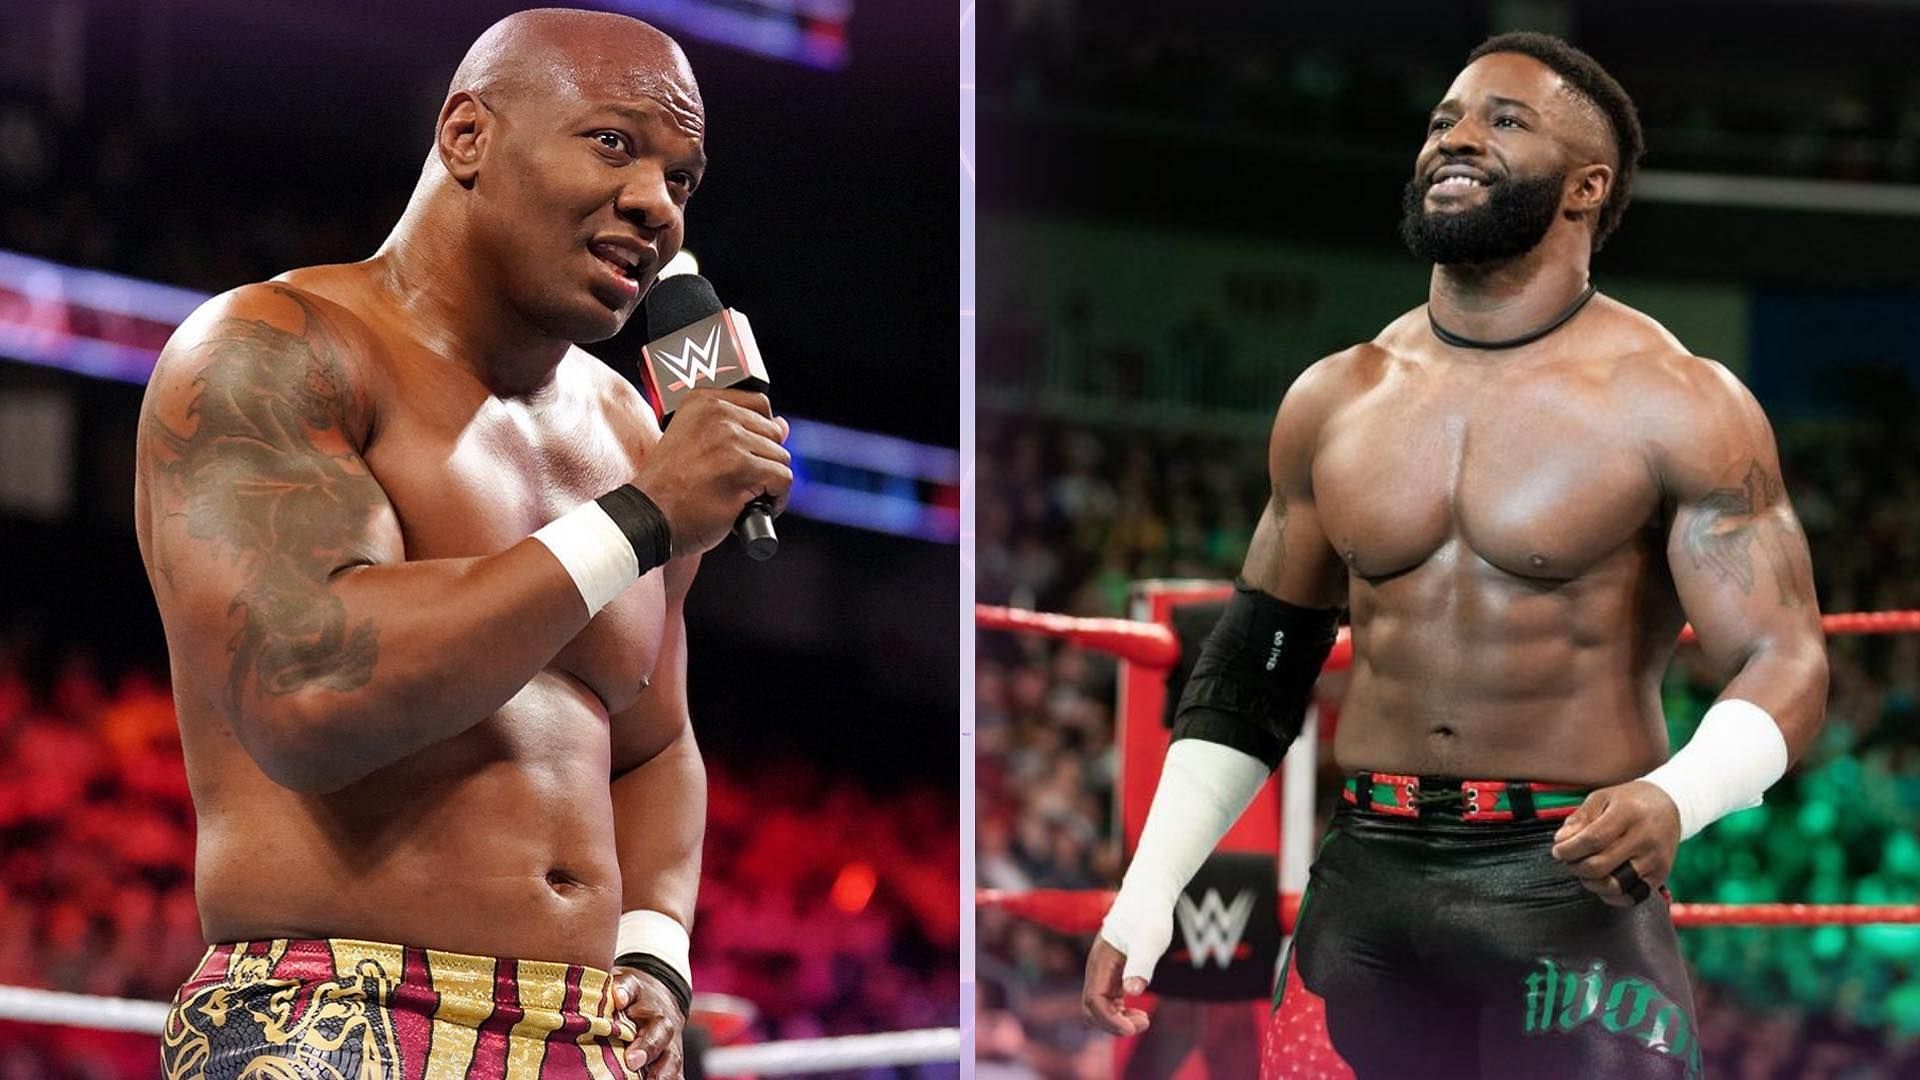 Cedric Alexander and Shelton Benjamin are free agents in WWE